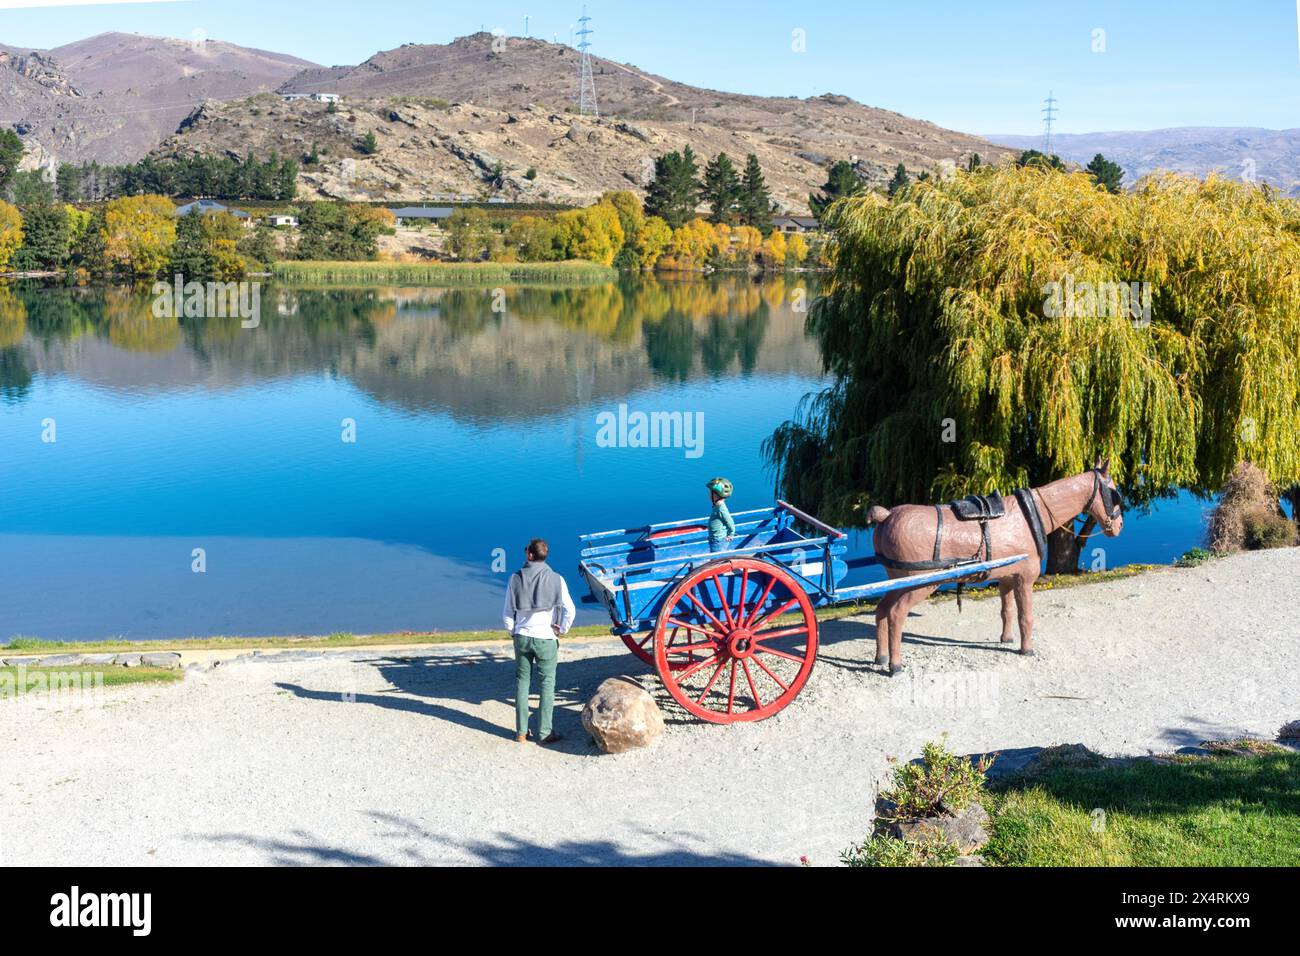 Horse cart by Clutha River, Cromwell Heritage Precinct, Melmore Terrace, Cromwell (Tirau), Central Otago, Otago, New Zealand Stock Photo